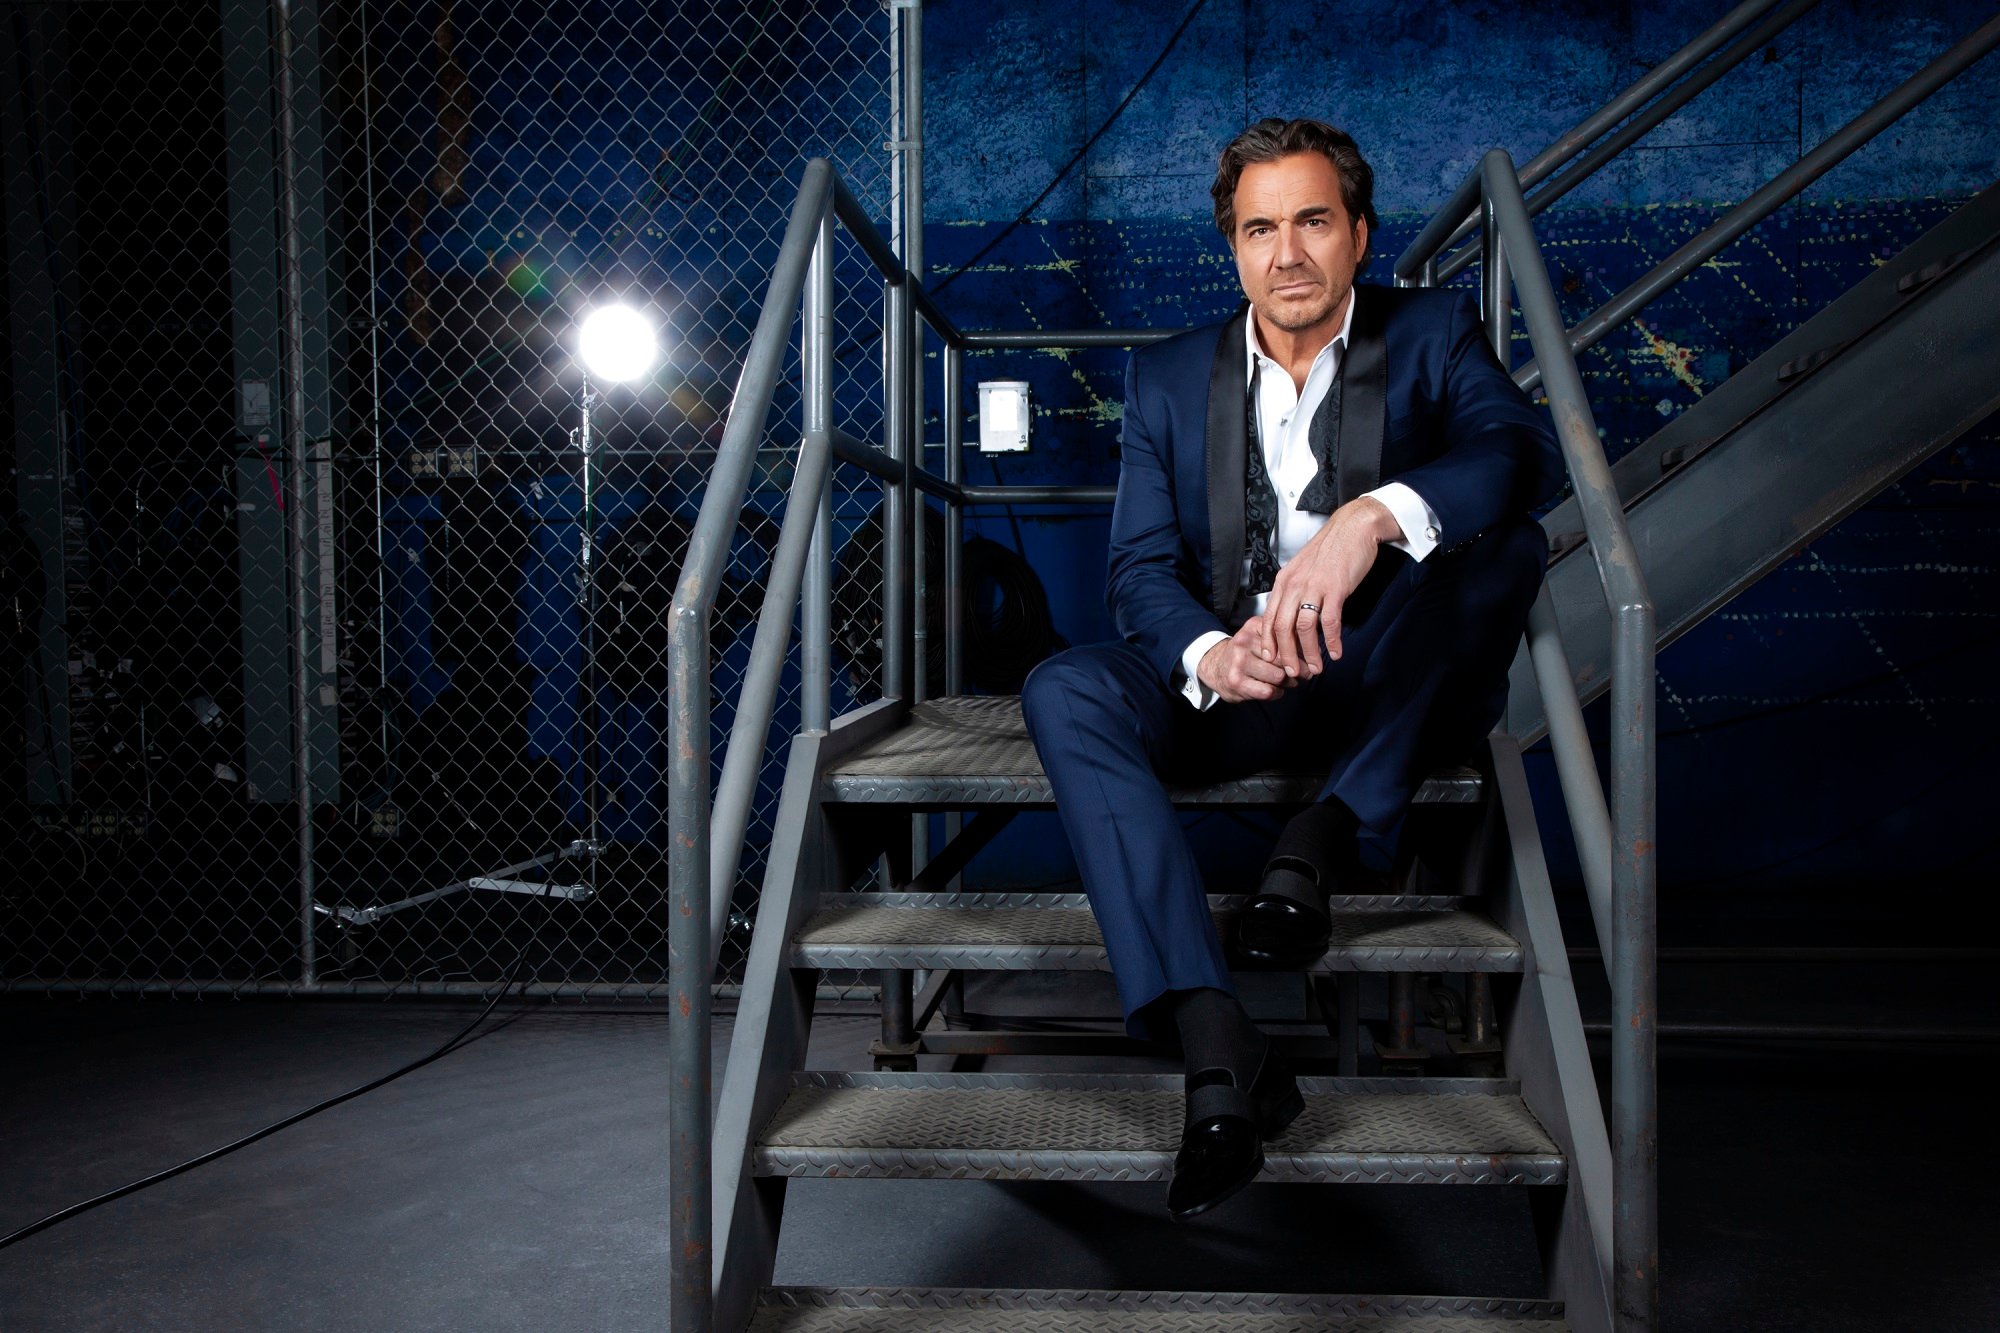 The Bold and the Beautiful speculation focuses on Ridge, pictured here in a tailored blue suit on concrete steps